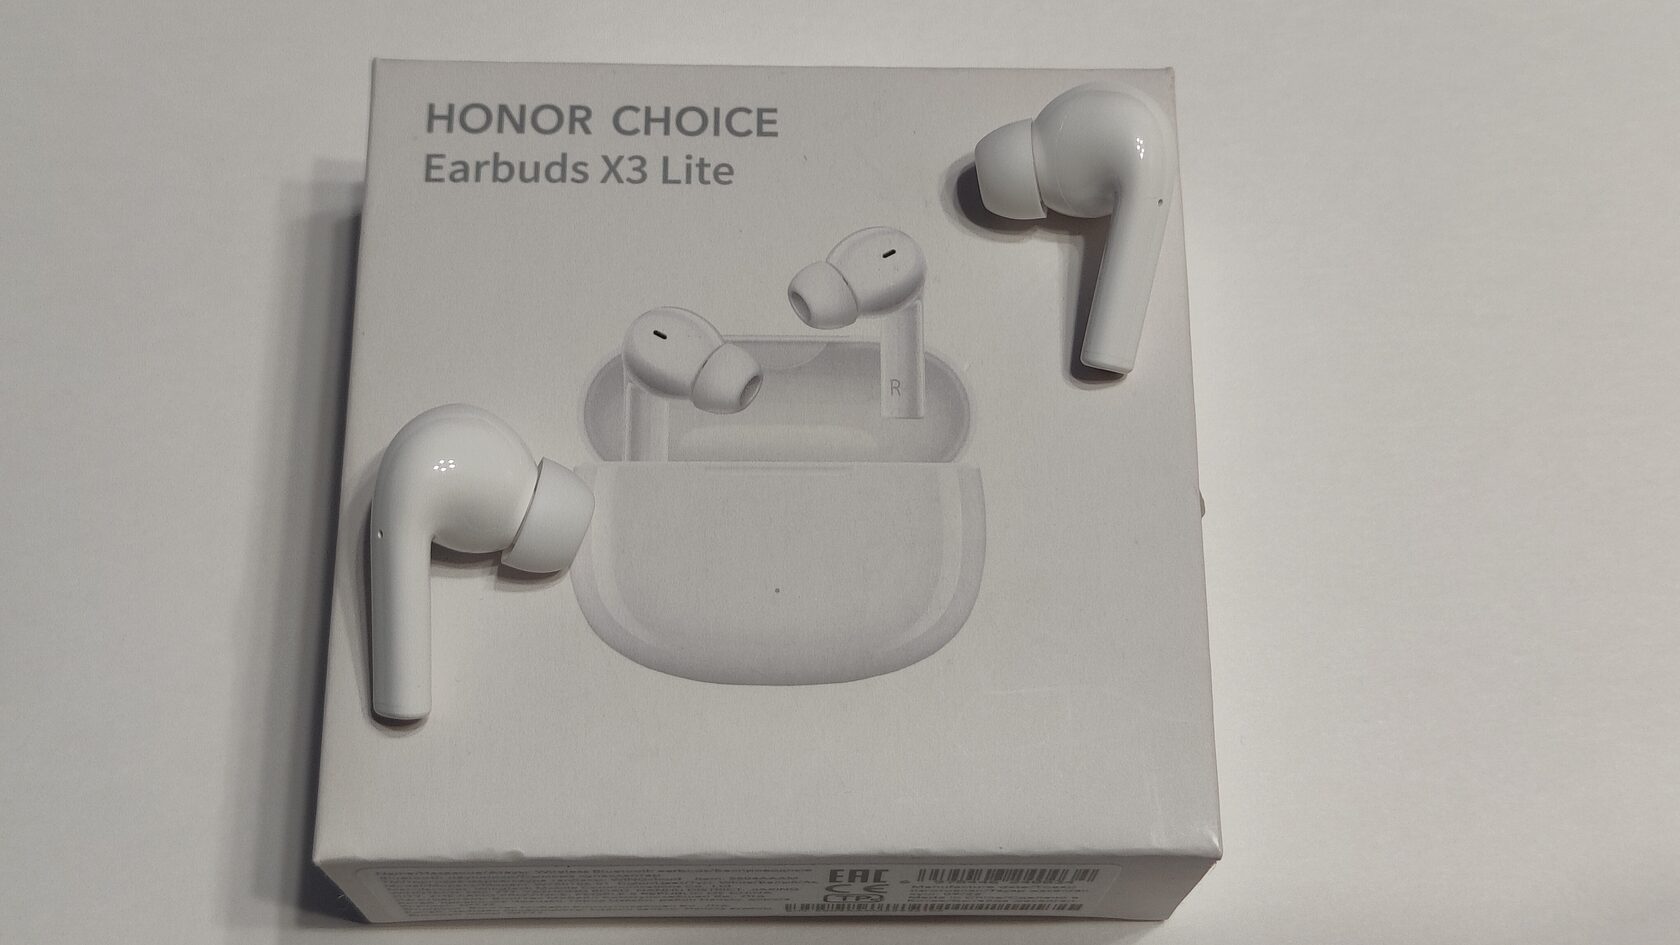 Honor choice earbuds x5 pro обзоры. Наушники TWS Honor choice Earbuds x3. True Wireless Honor choice Earbuds x3 Lite White. Беспроводные наушники Honor choice Earbuds x3 Lite. Наушники TWS Honor choice Earbuds x3 белый.